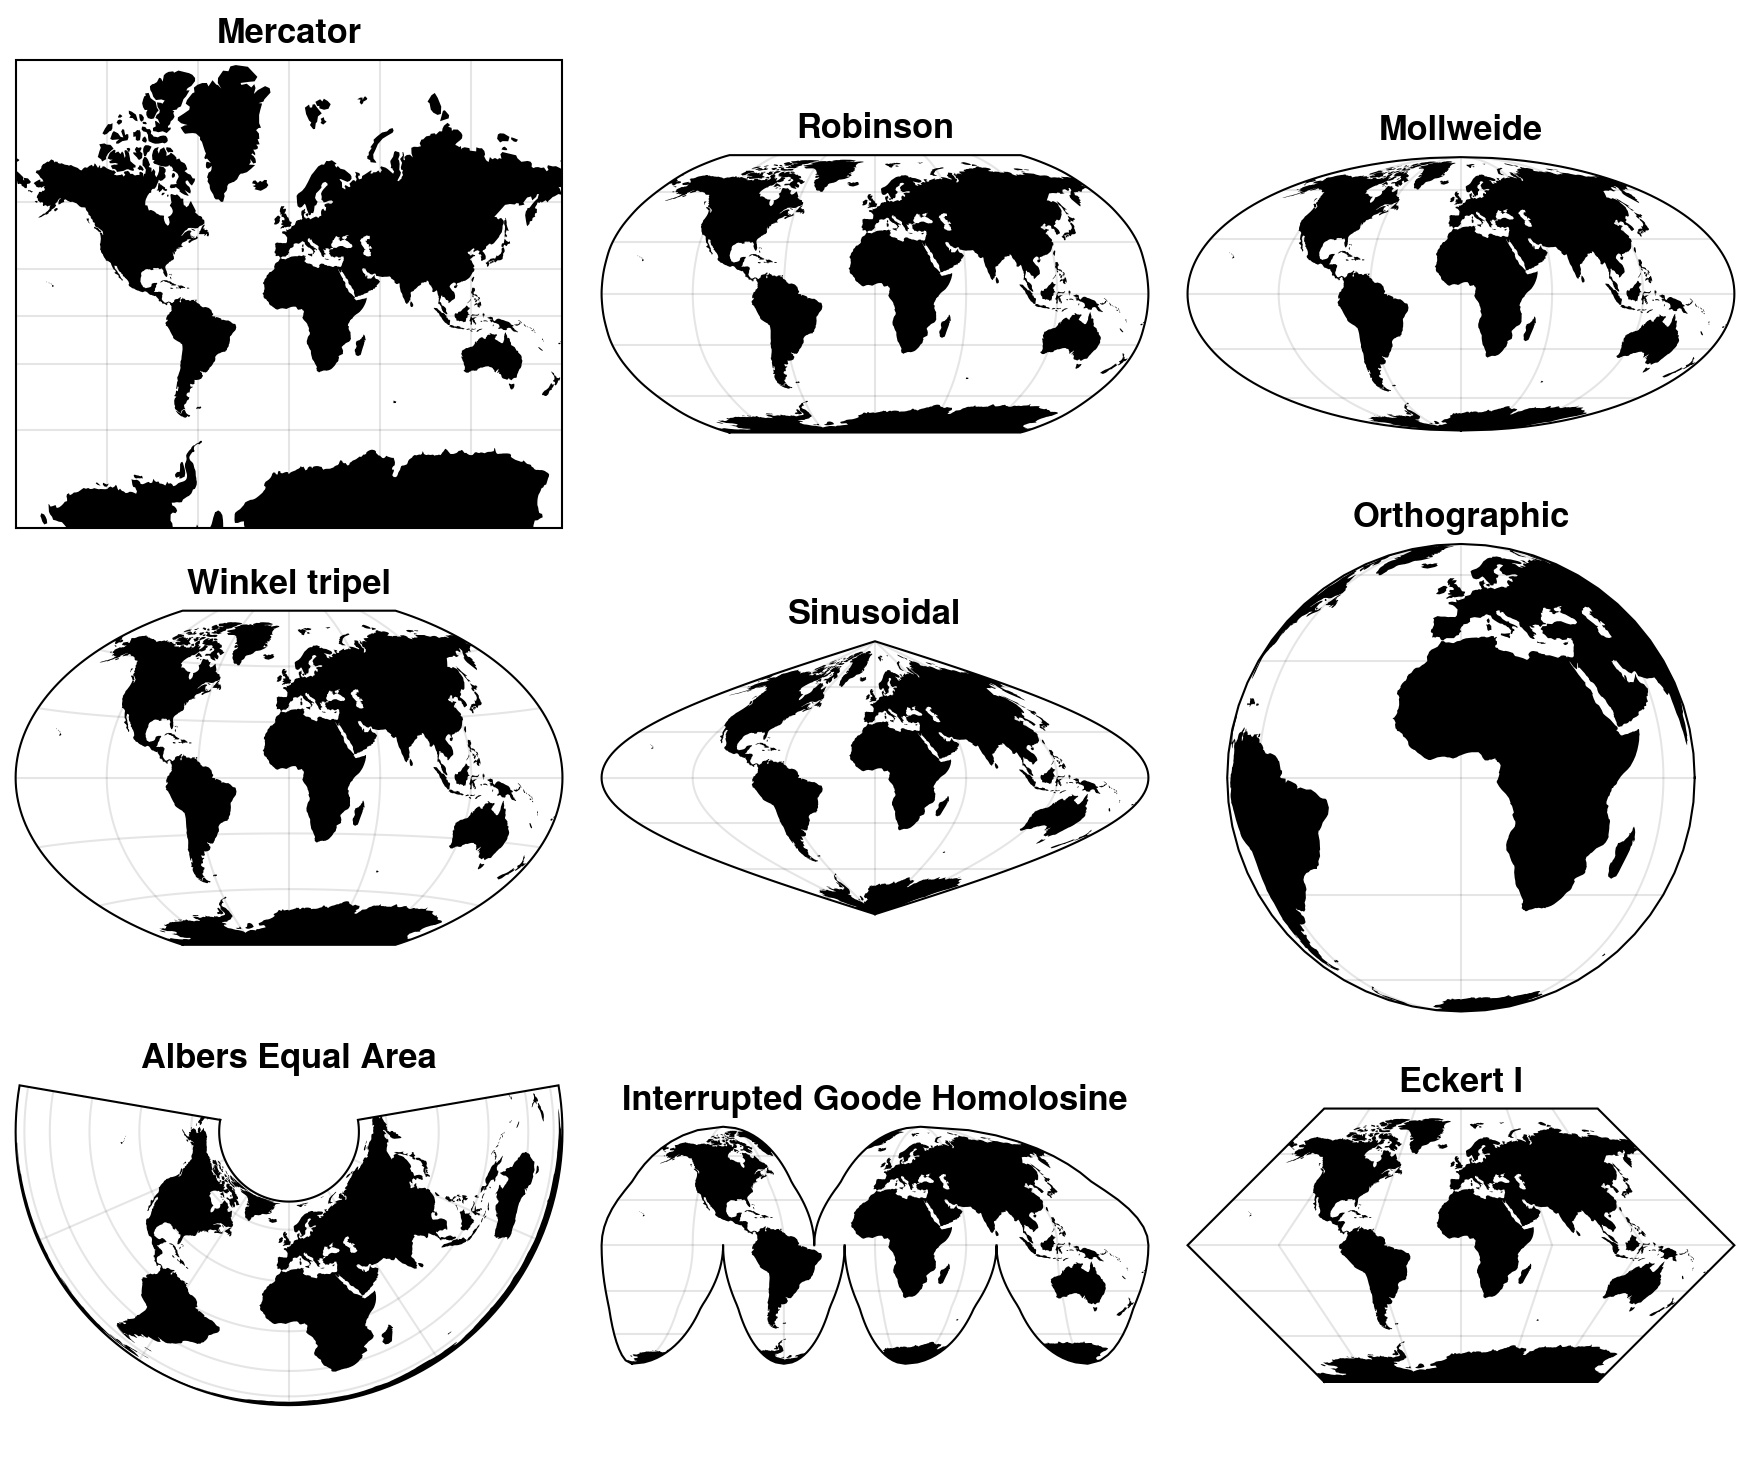 Figure 5.11. Different map projections that can be used to represent the geographic data on a two-dimensional plane.